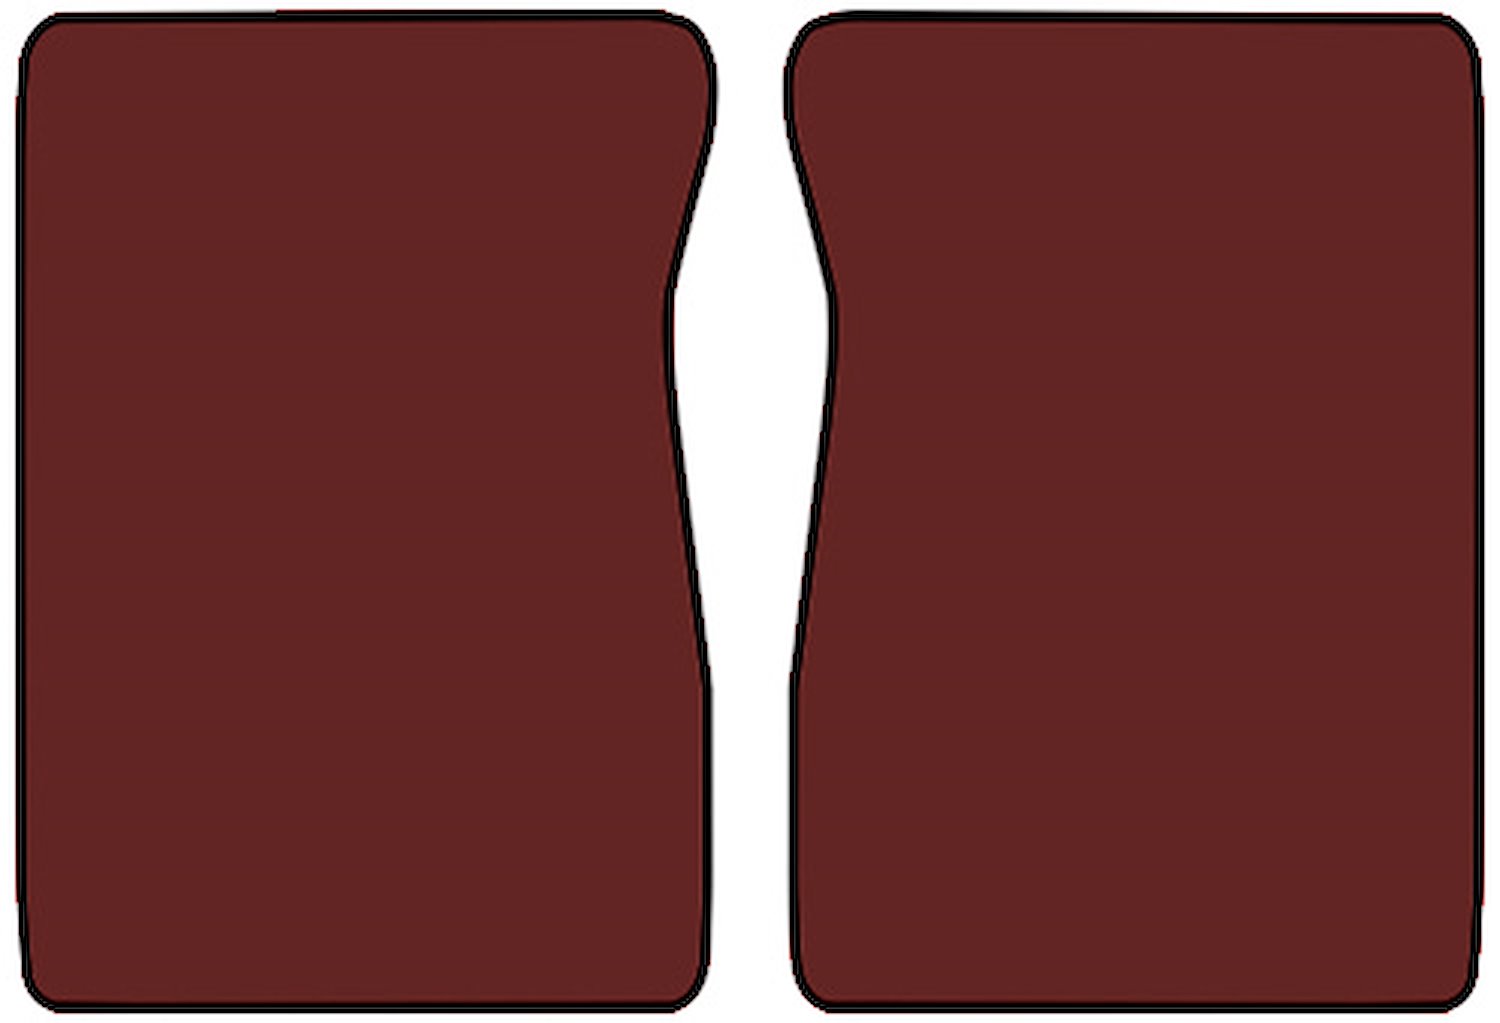 Molded Cut Pile Floor Mats for 1975-1980 C/K Series Chevrolet and GMC Trucks [2-Piece, Oxblood]